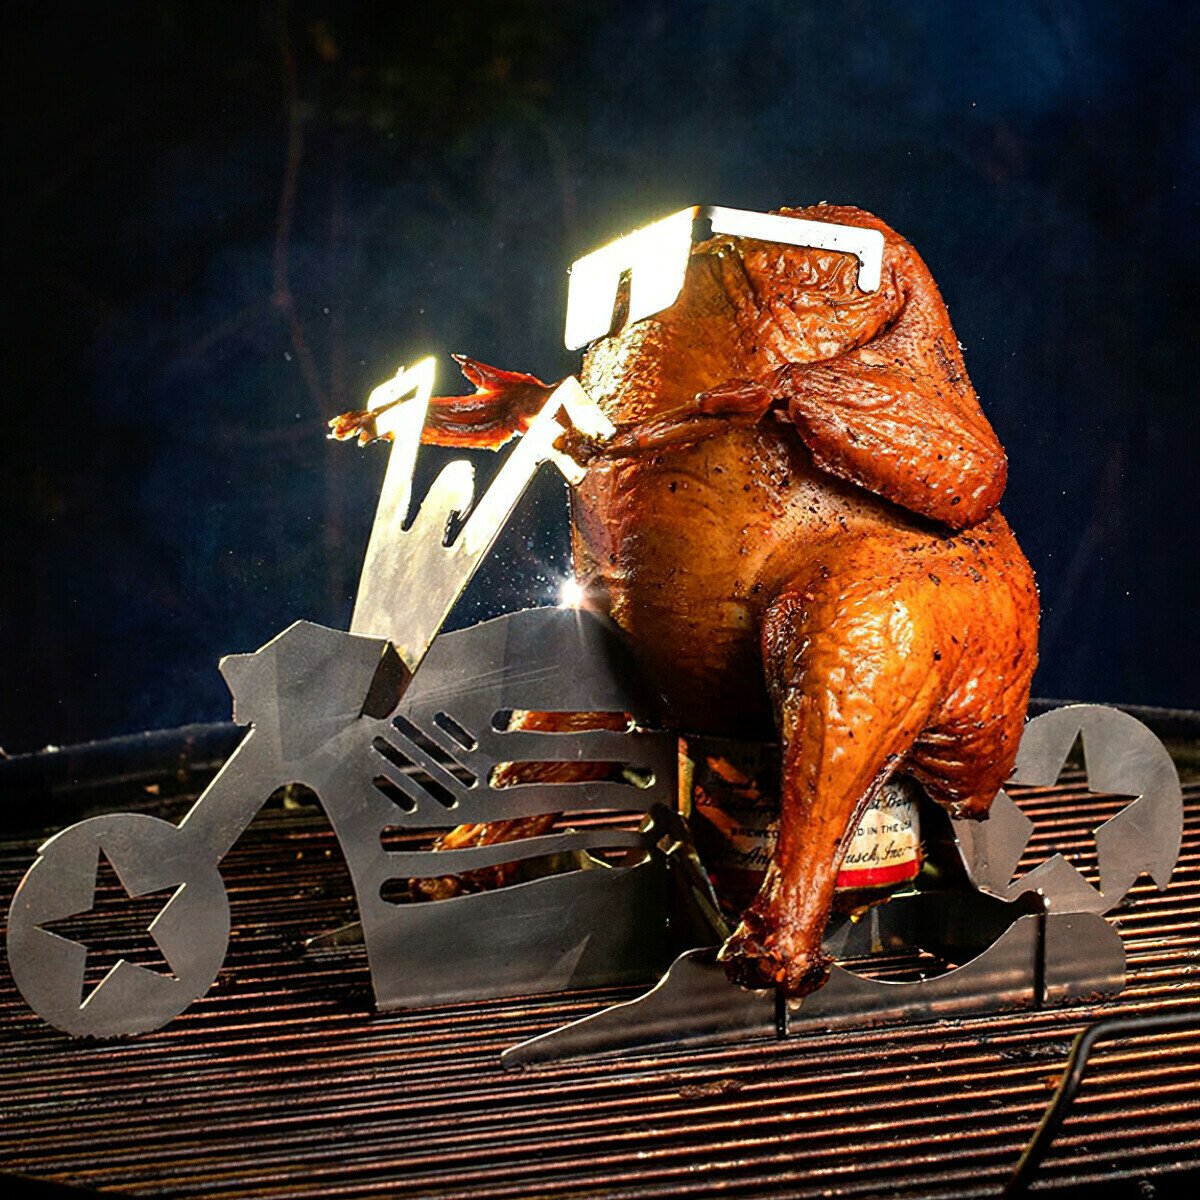 New Portable chicken stand Beer- American motorcycle BBQ